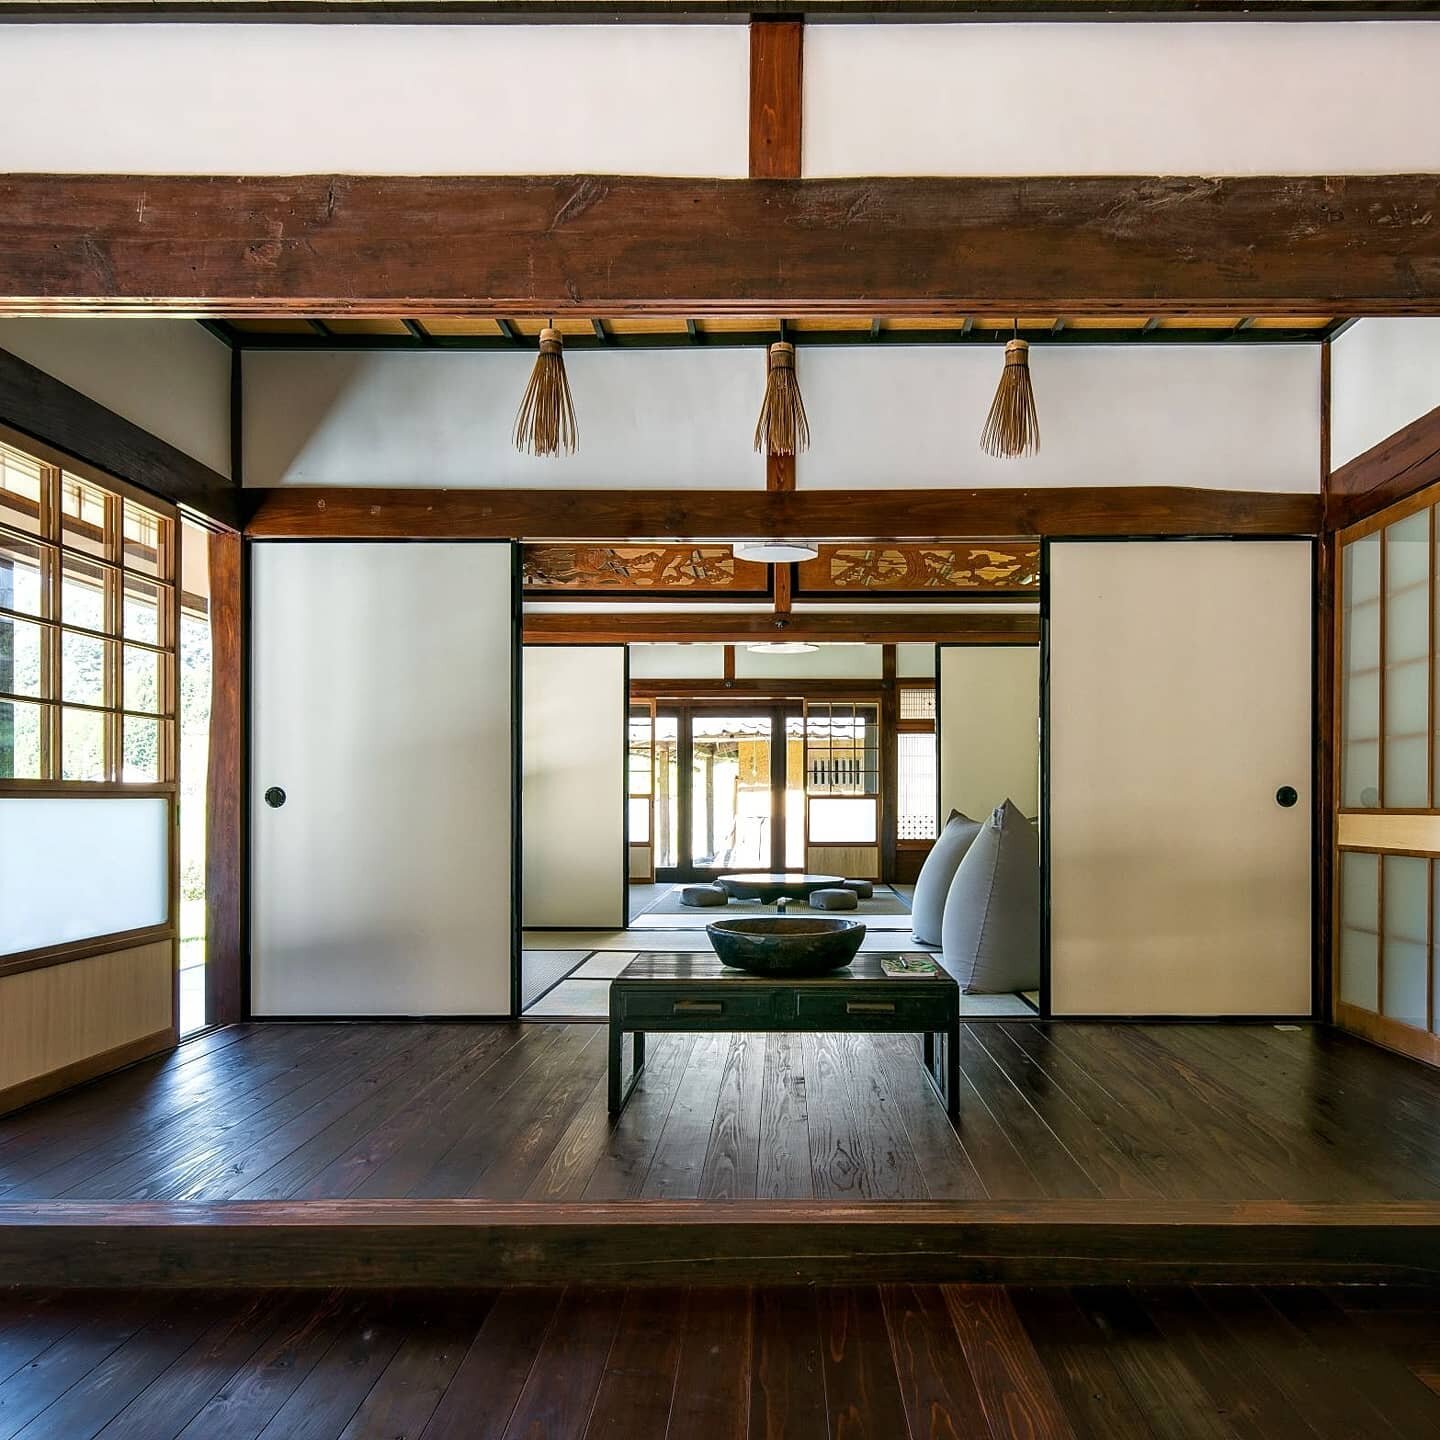 Furosen is a 100-year-old farmhouse nestled in a secluded valley in Shobara village in Hiroshima Prefecture. Features include a wood-burning outdoor bath, views of beautiful terraced fields, and a telescope to observe the starry night sky in the pitc